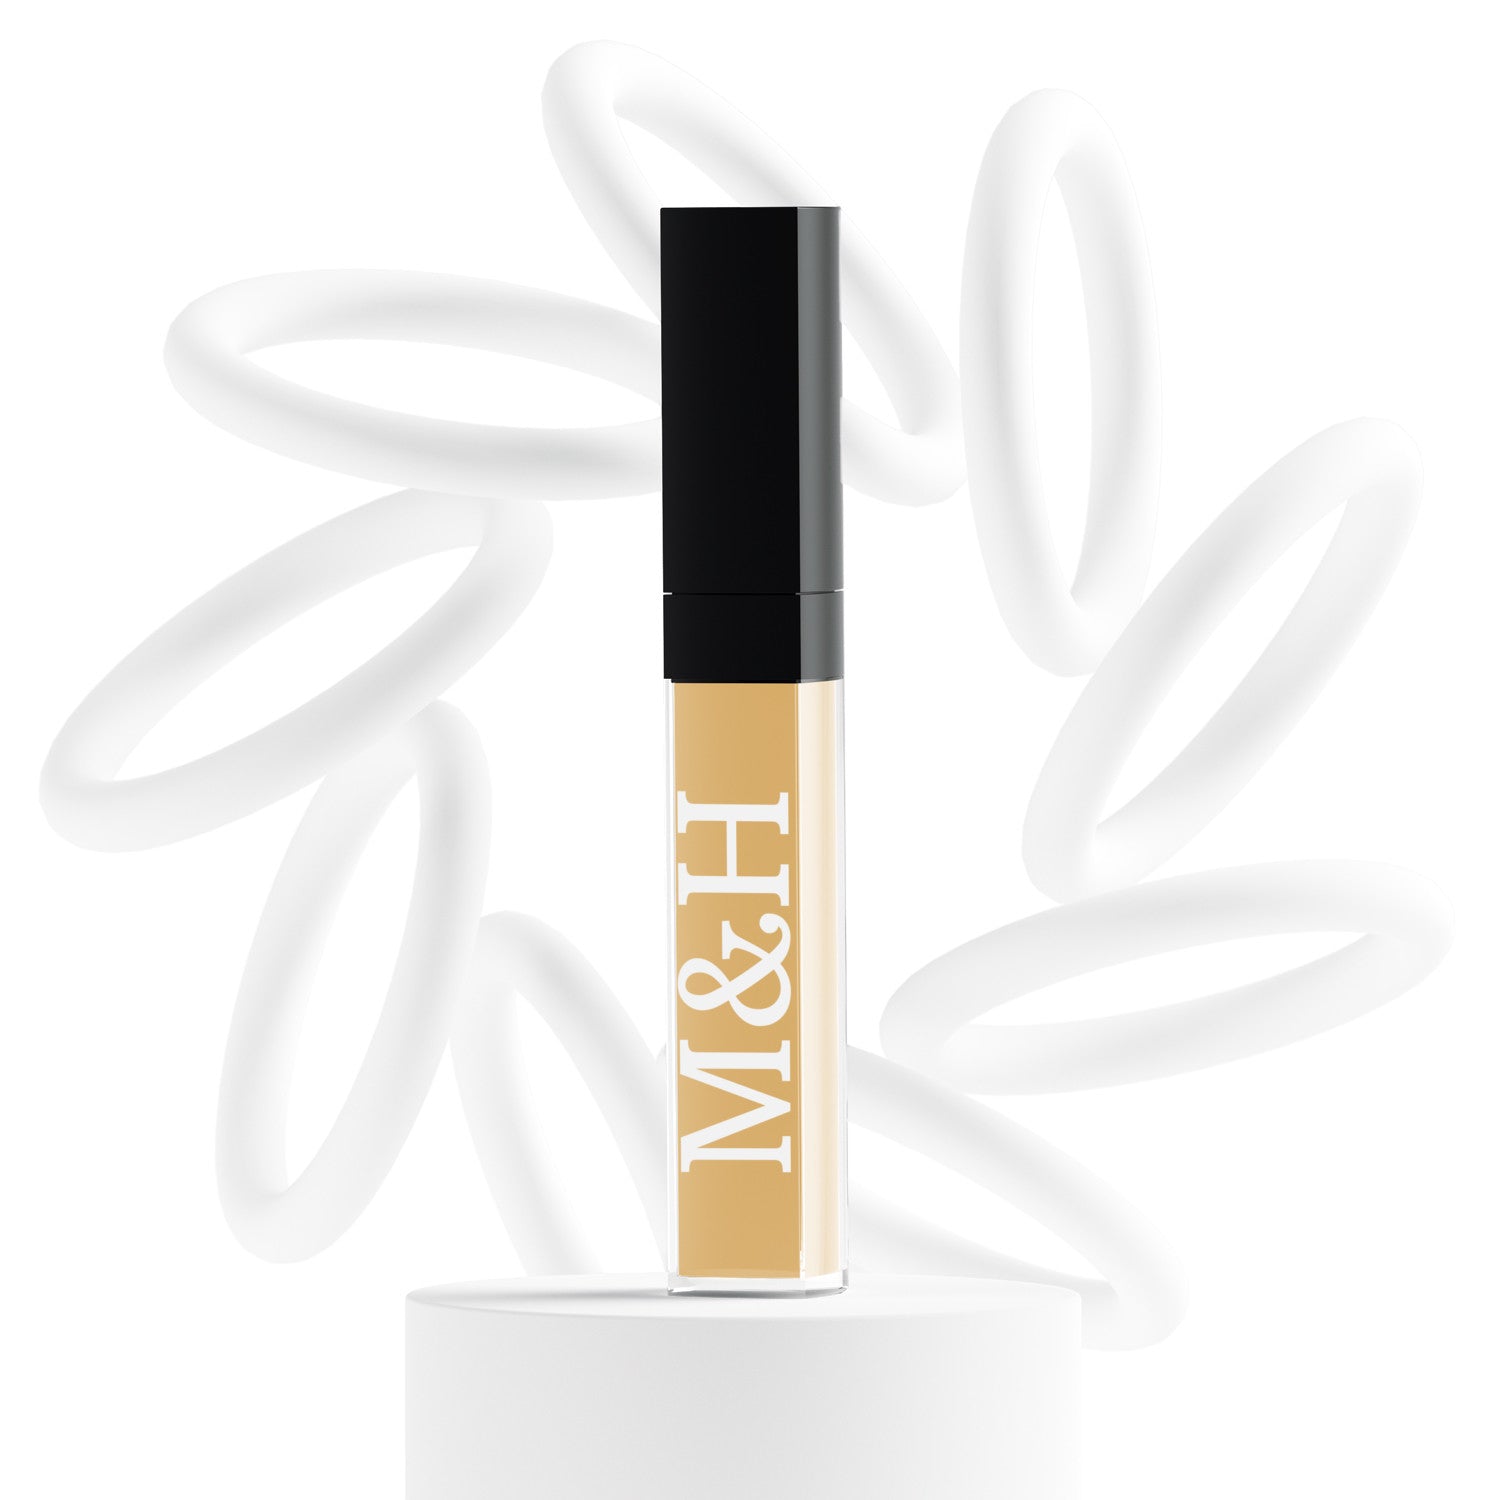 Vegan Concealers - M&H FashionVegan ConcealersconcealerM&H FashionM&H FashionConcealer-953Medium TanVegan ConcealersM&H FashionconcealerM&H Fashion This multifunctional concealer is designed to cover under-eye circles, complexion alterations, and major imperfections like scars, hyperpigmentation, burns, and tatVegan Concealers